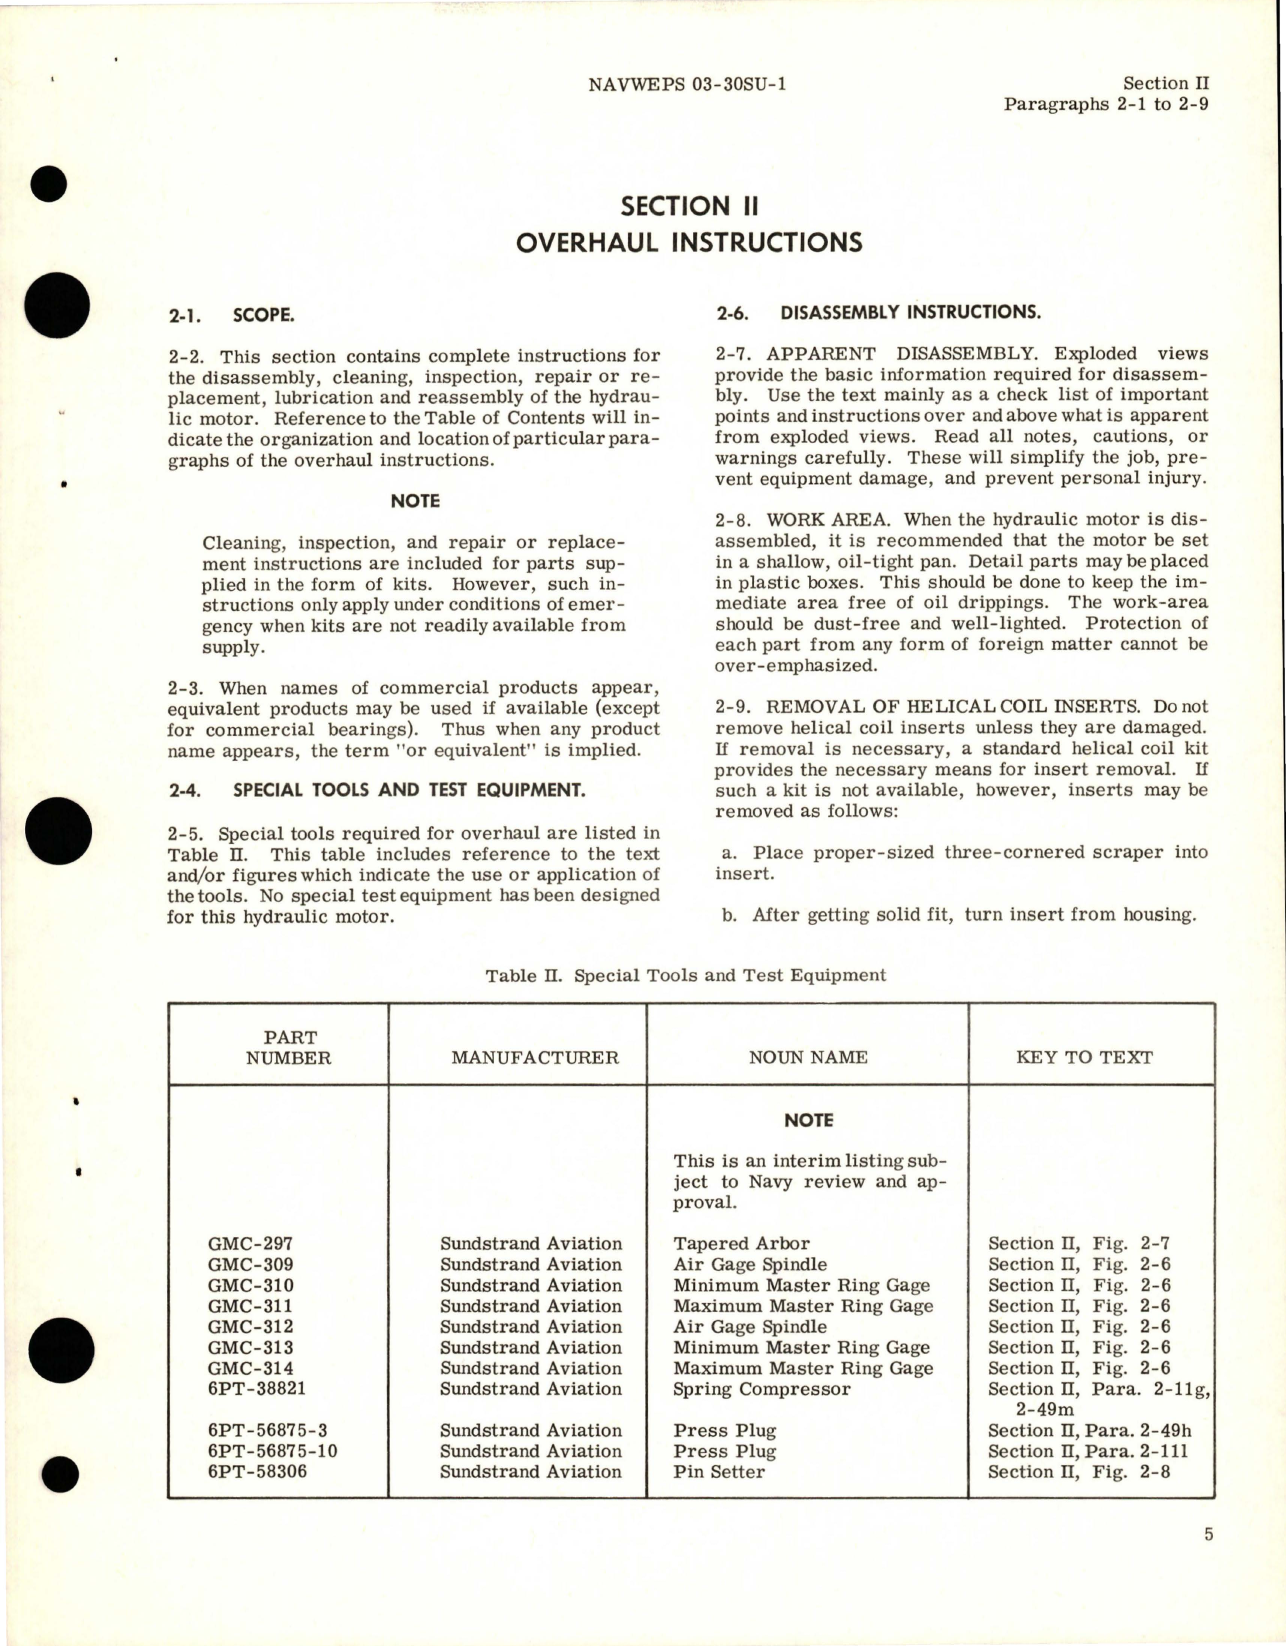 Sample page 9 from AirCorps Library document: Overhaul Instructions for Hydraulic Motor - Model MC011-21E - Part 678069